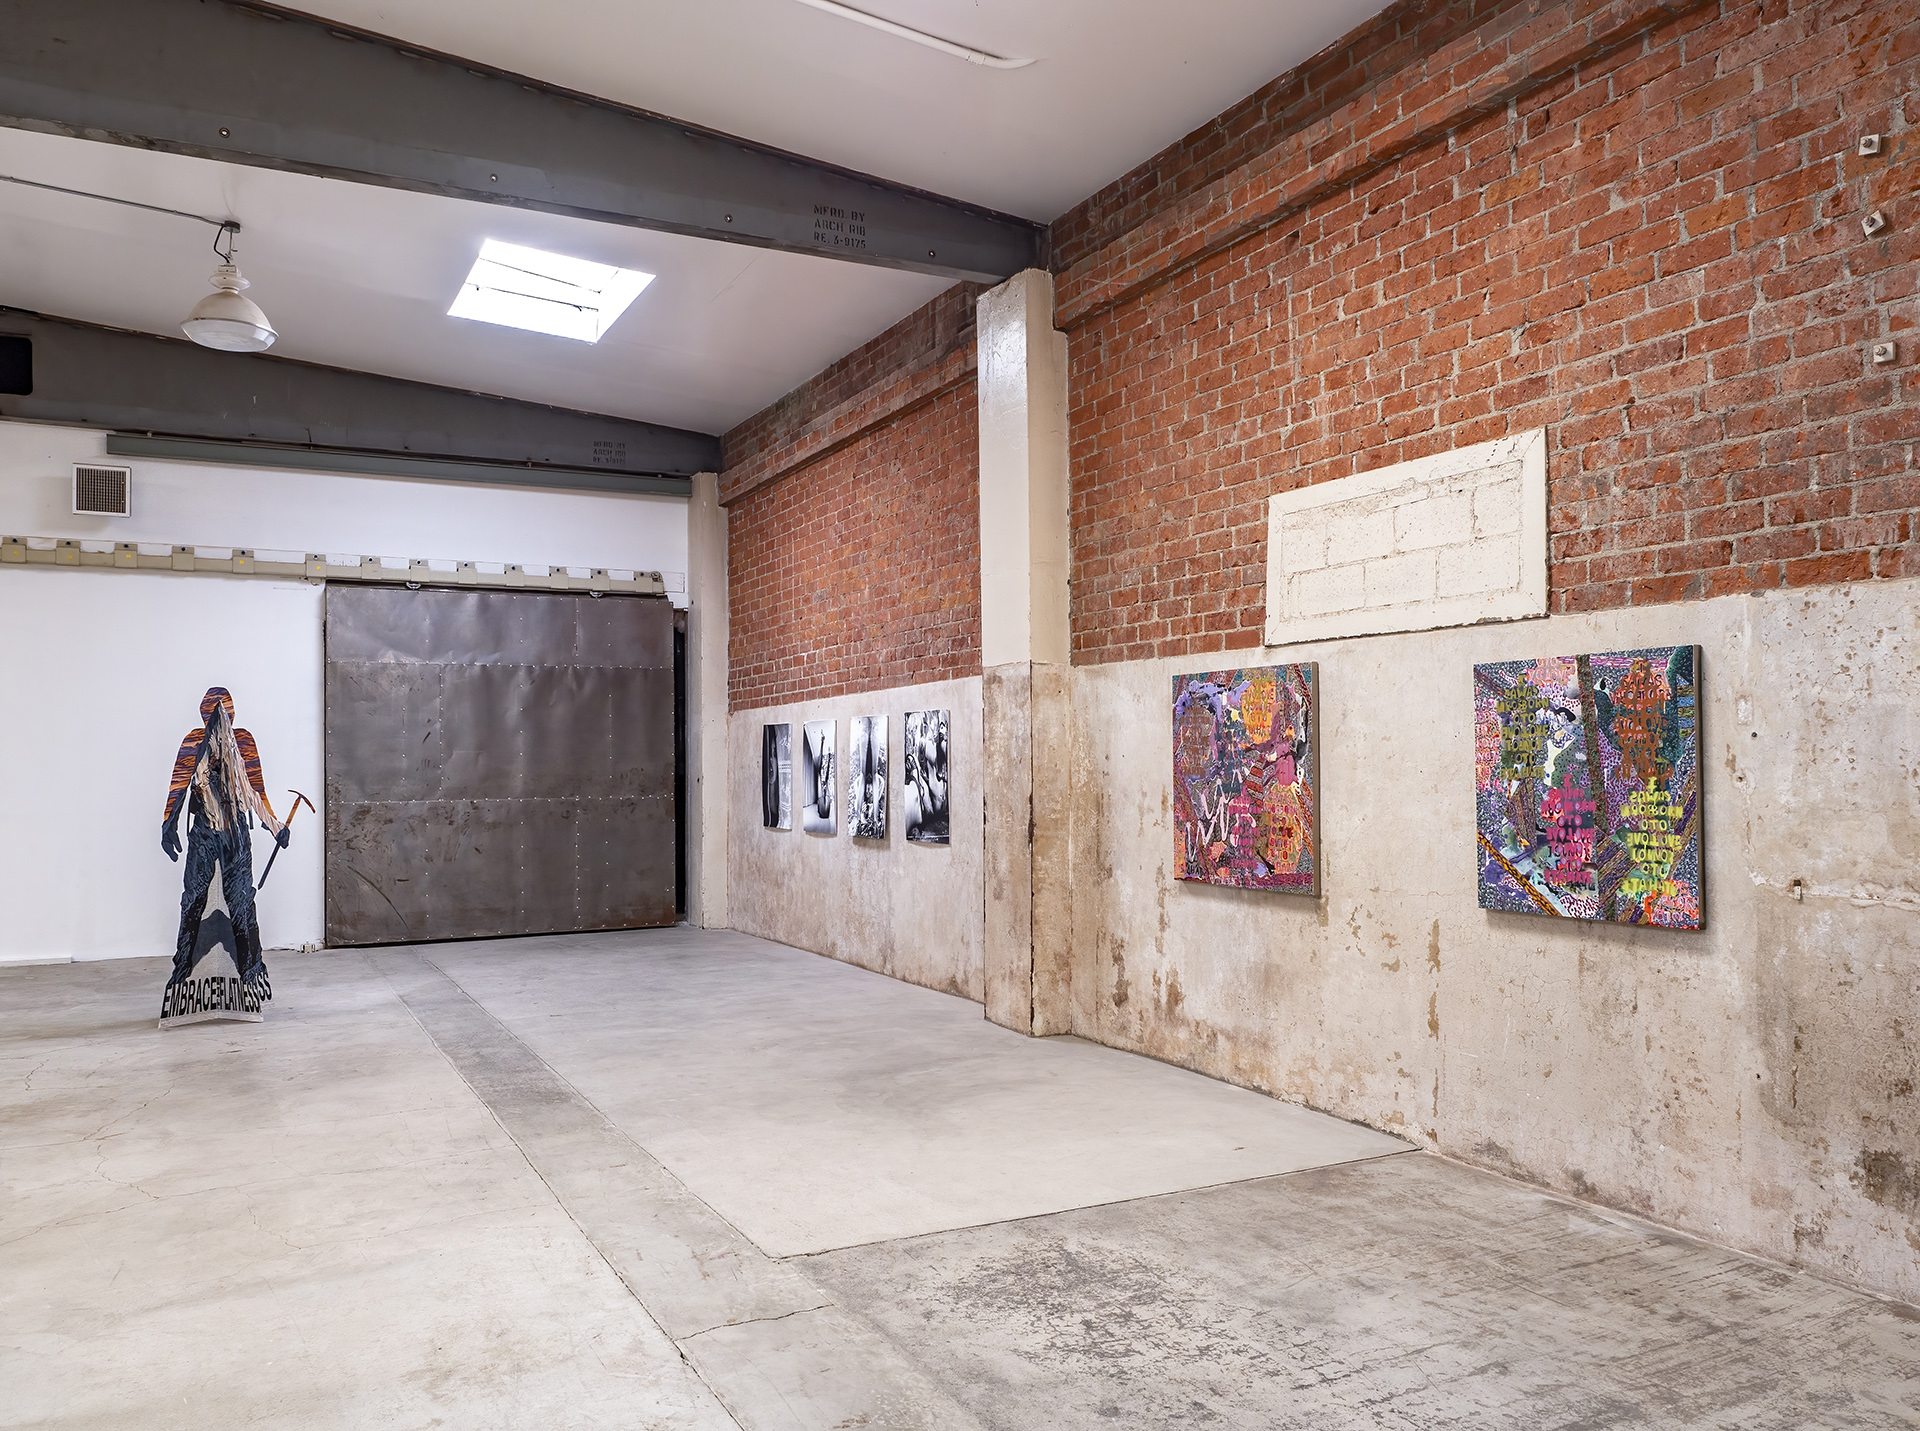 Left to right: Daniel Hawkins (sculpture), Hester Scheurwater (four photographs), Alexandra Grant (two paintings)